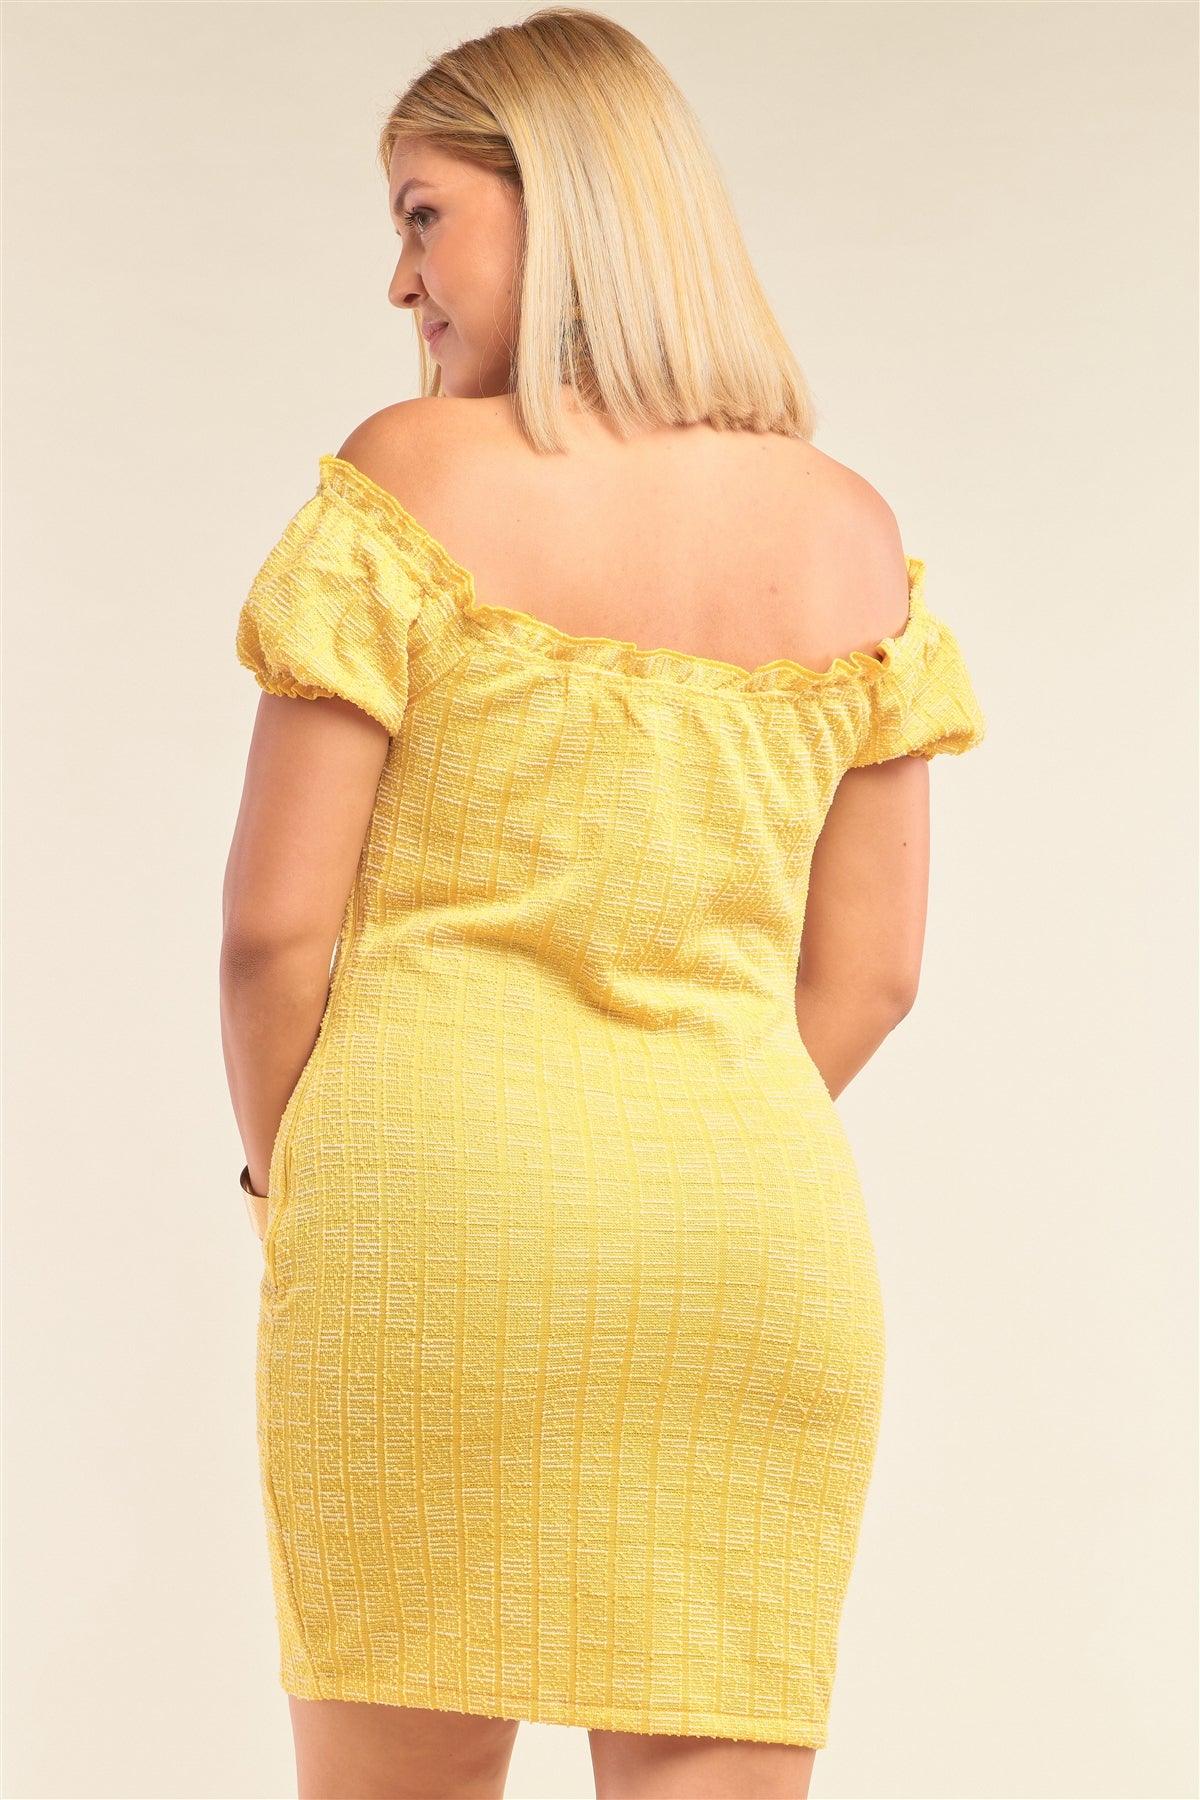 Junior Plus Size Lemon Yellow Sparkly Tweed Plaid Fitted Off-The-Shoulder Frill Hem Mini Dress /2-2-2